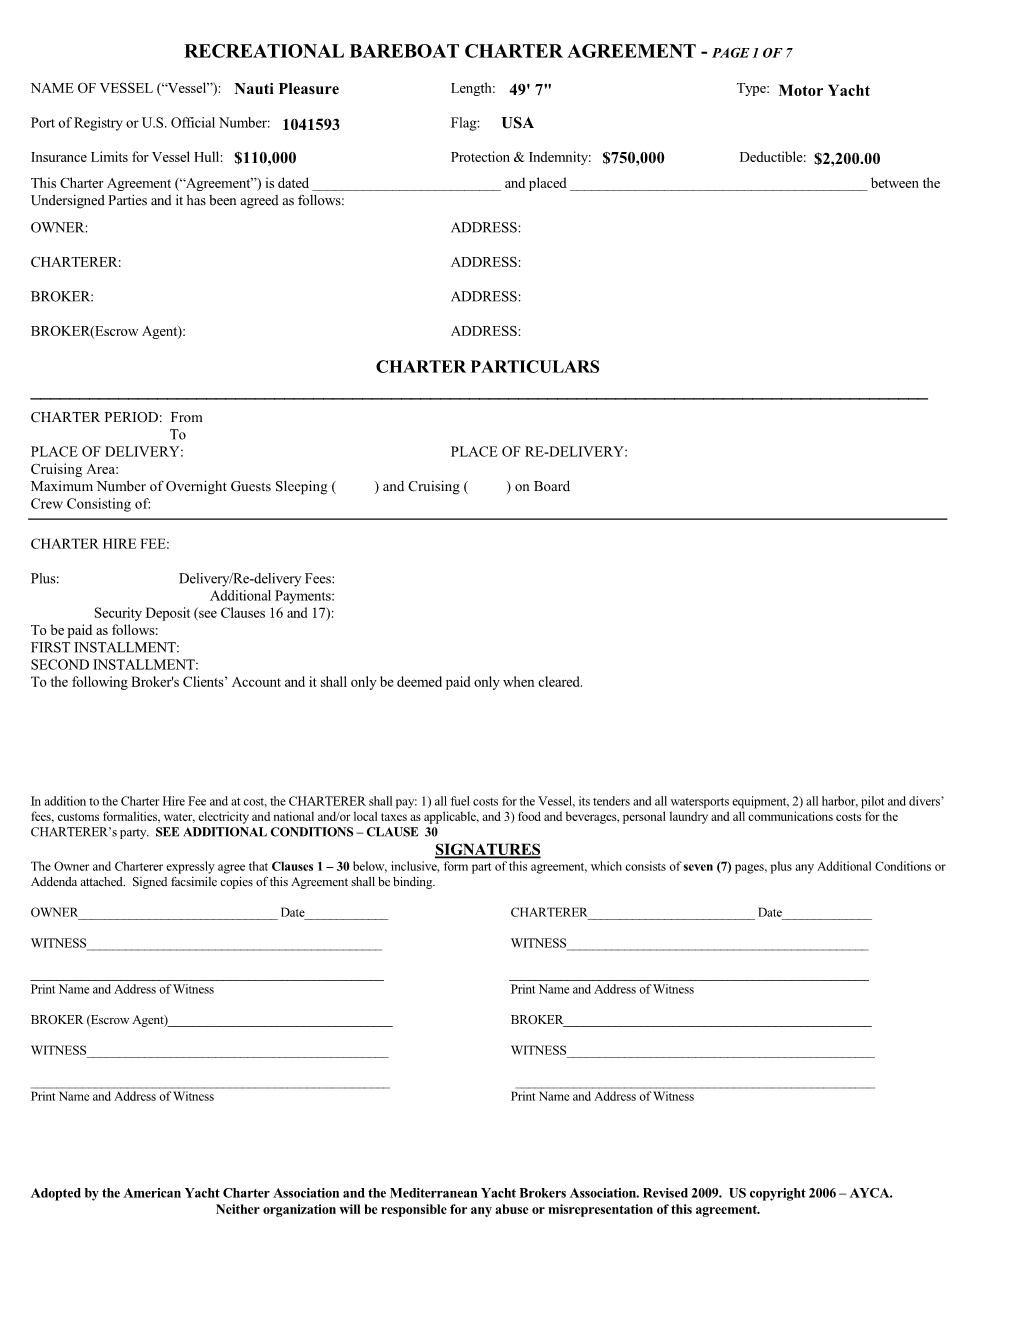 Recreational Bareboat Charter Agreement - Page 1 of 7